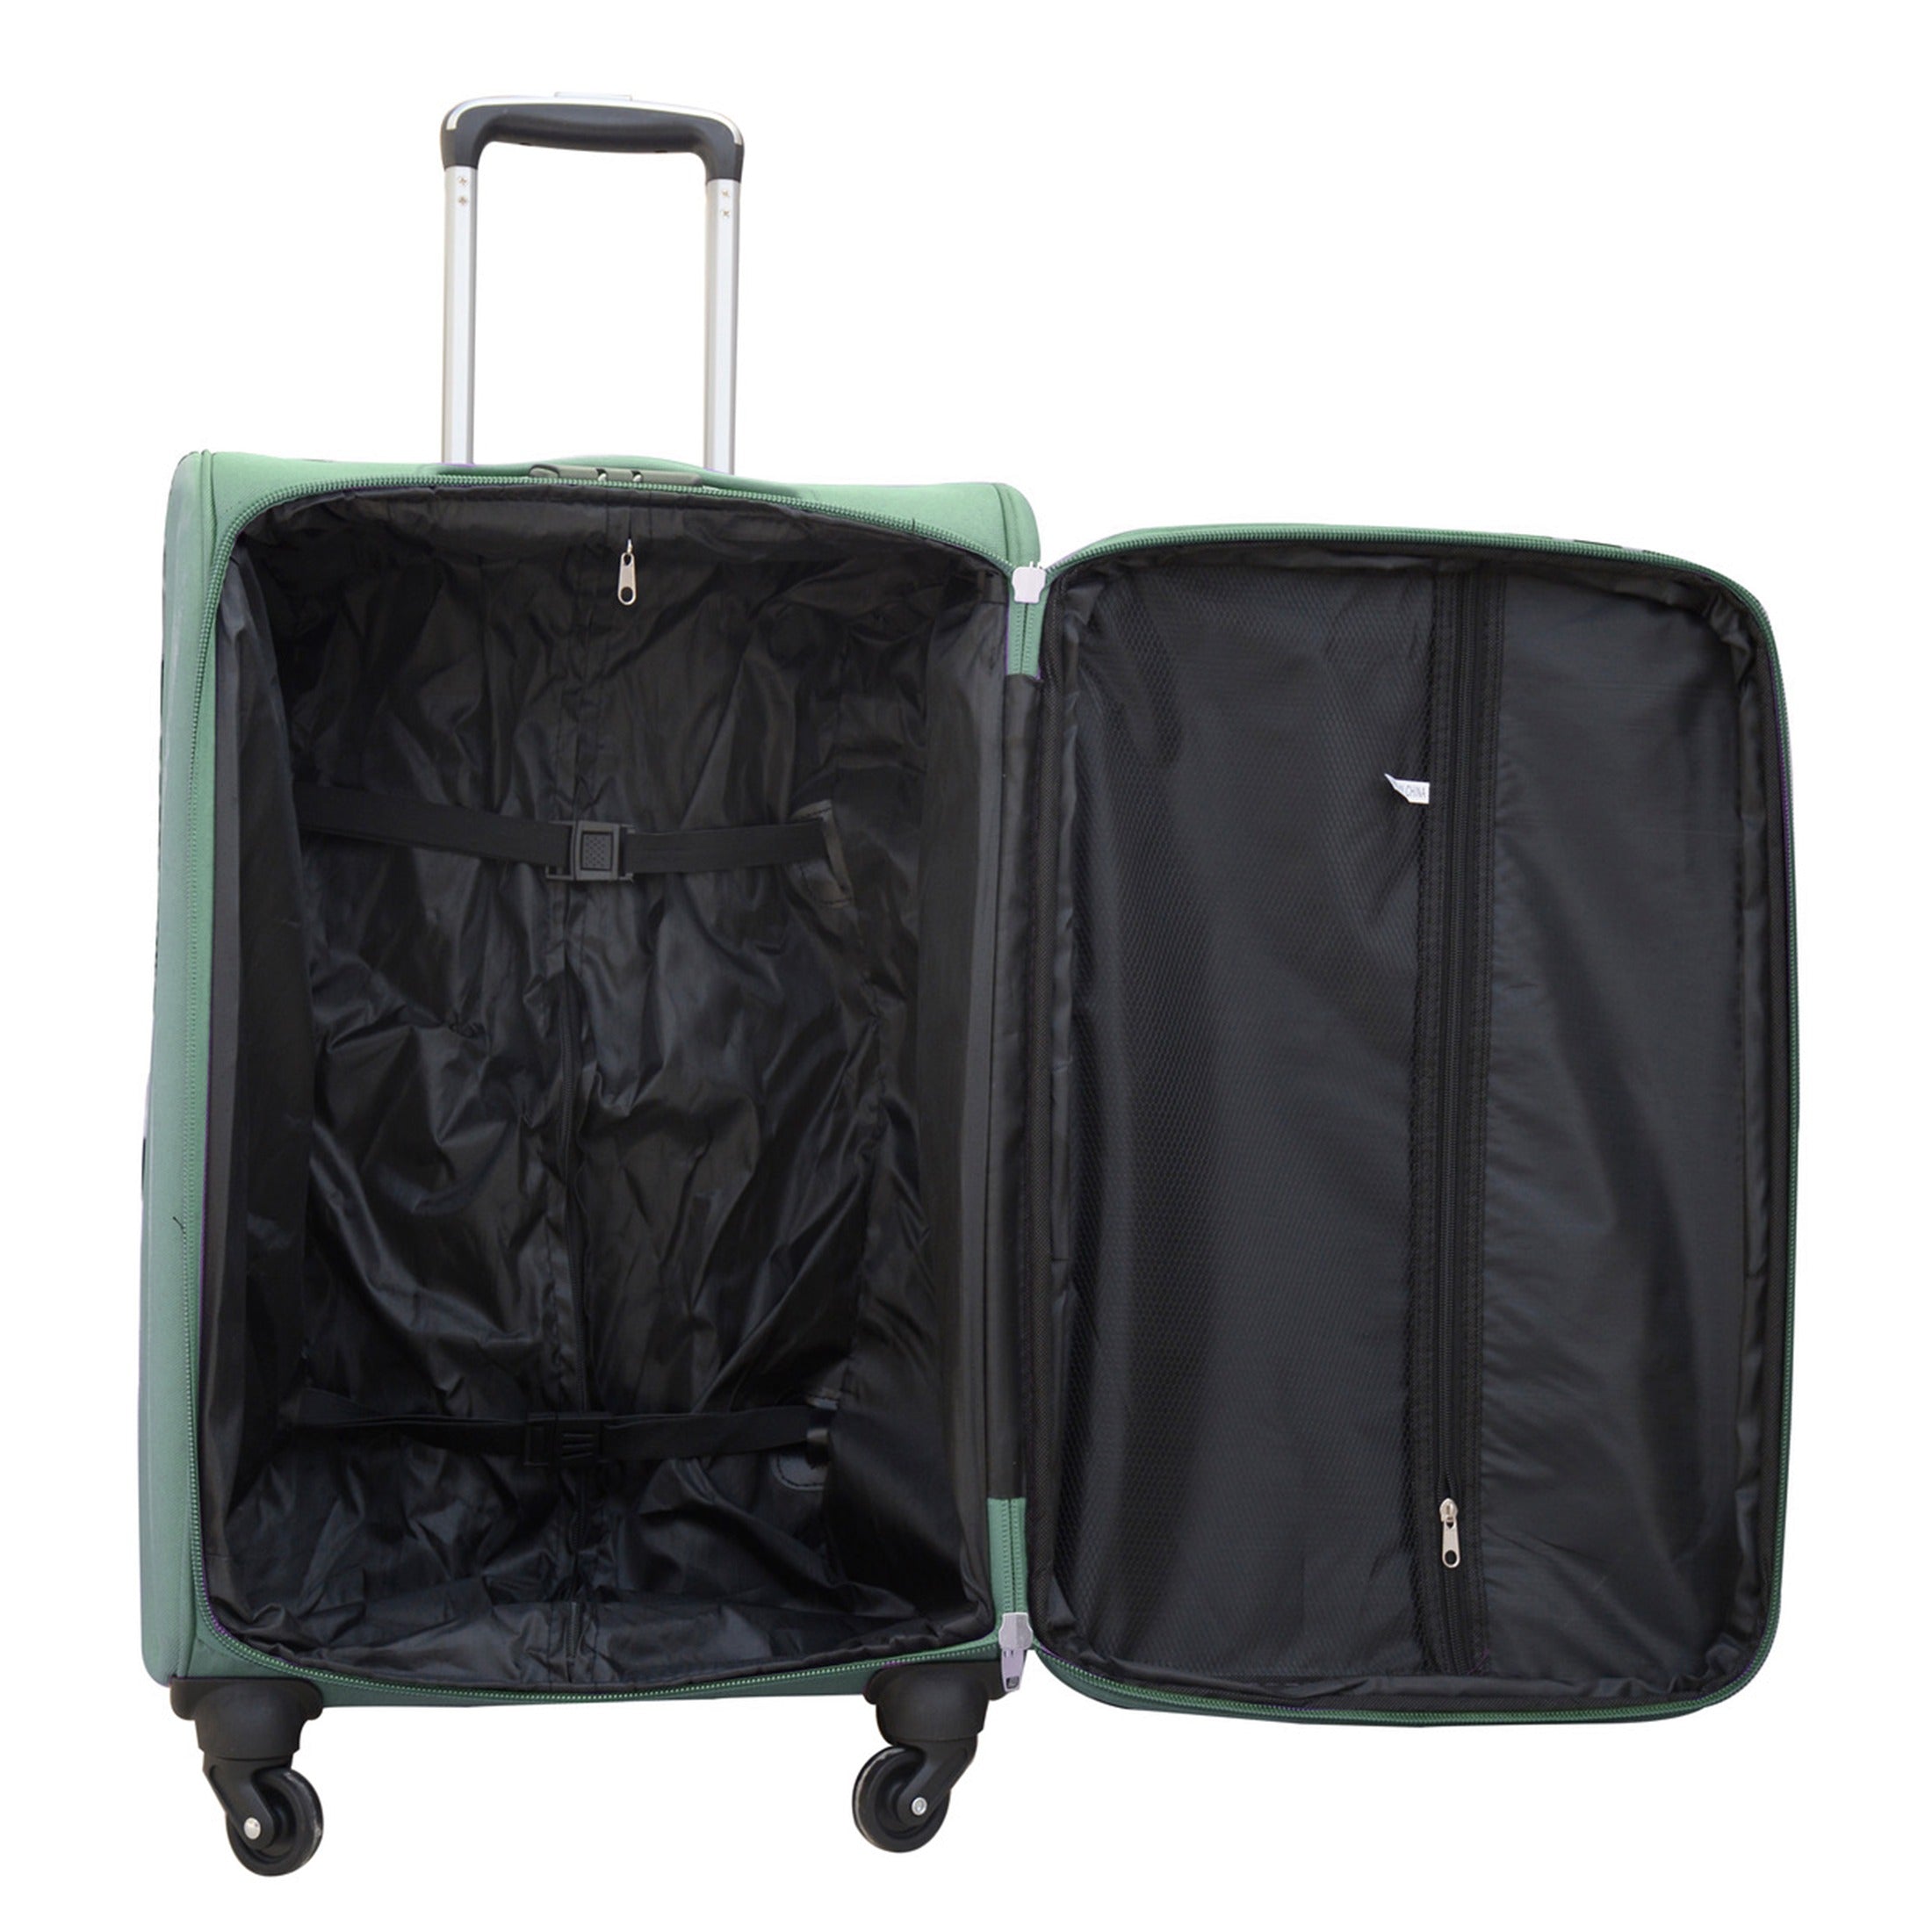 Soft Material Luggage | Soft Shell | Lightweight | 10 Kg - 20 Inches 4 Wheels | 2 Years Warranty | Jian 4 Wheel Green